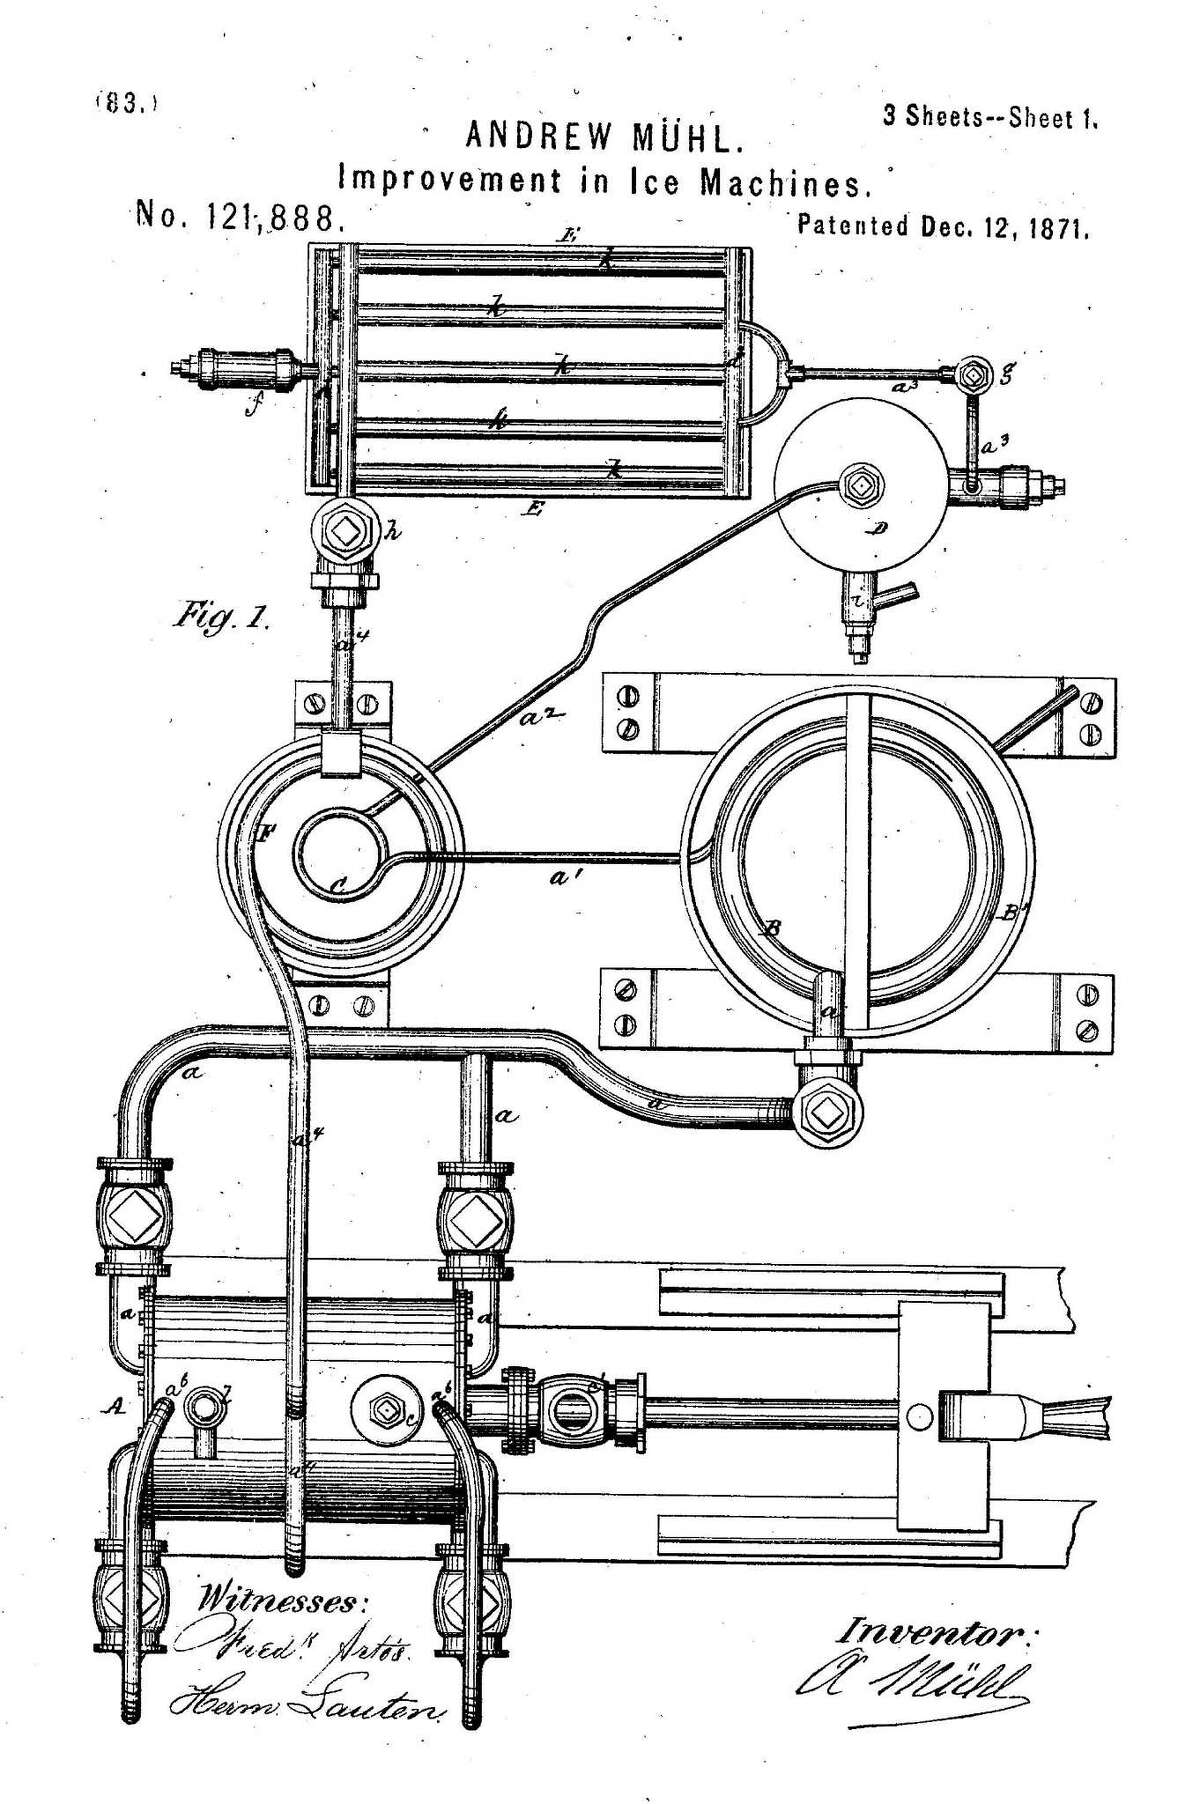 This drawing accompanied a patent application for Andrew Muhl’s ice-making machine.